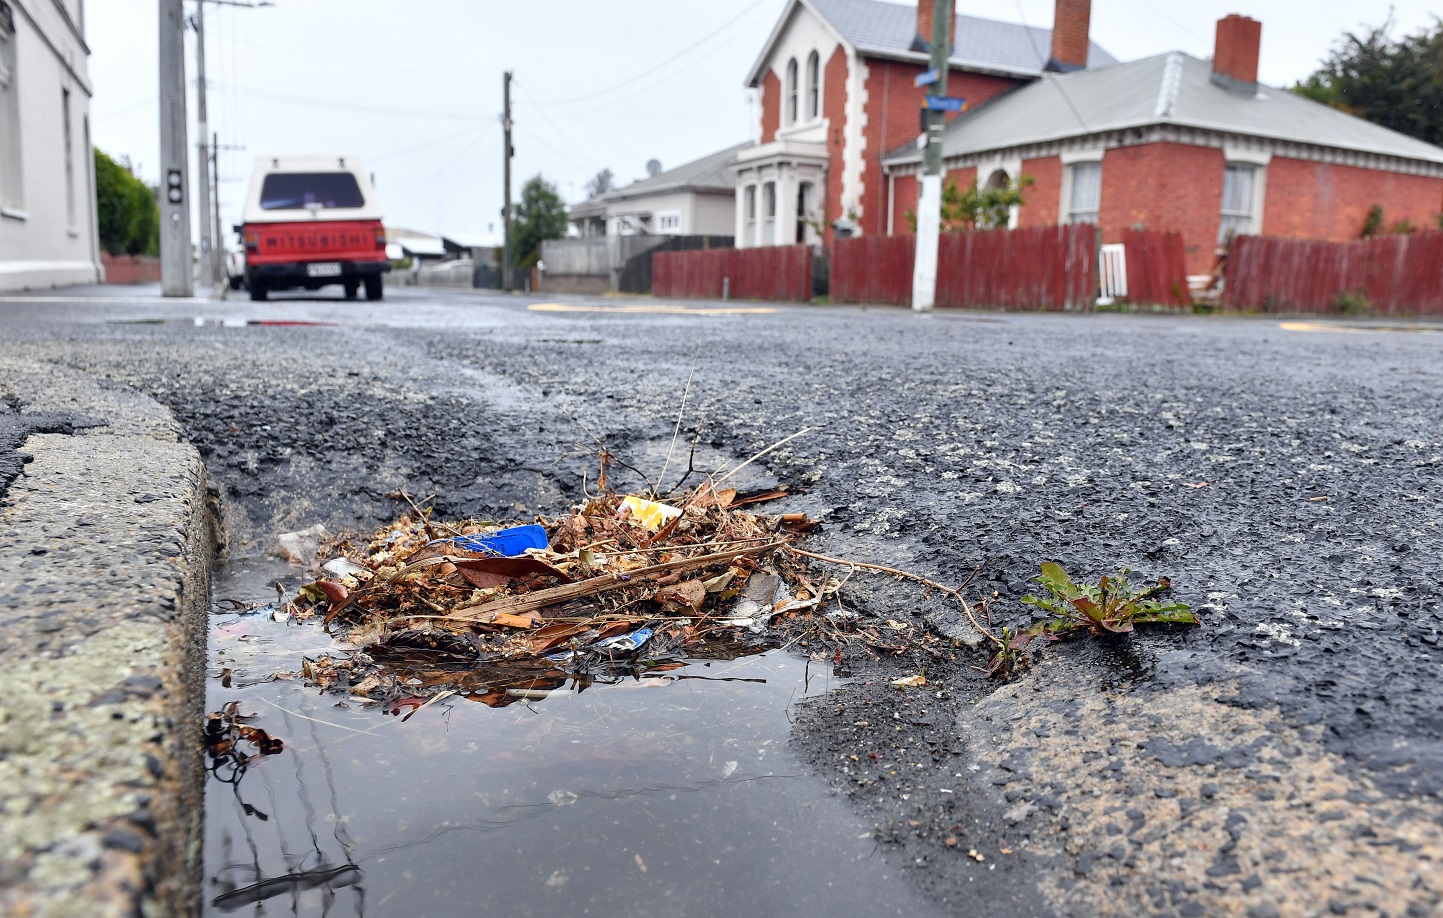 A drain in need of clearance on a rainy day on the corner of Thorn  and Fitzroy Sts in South...